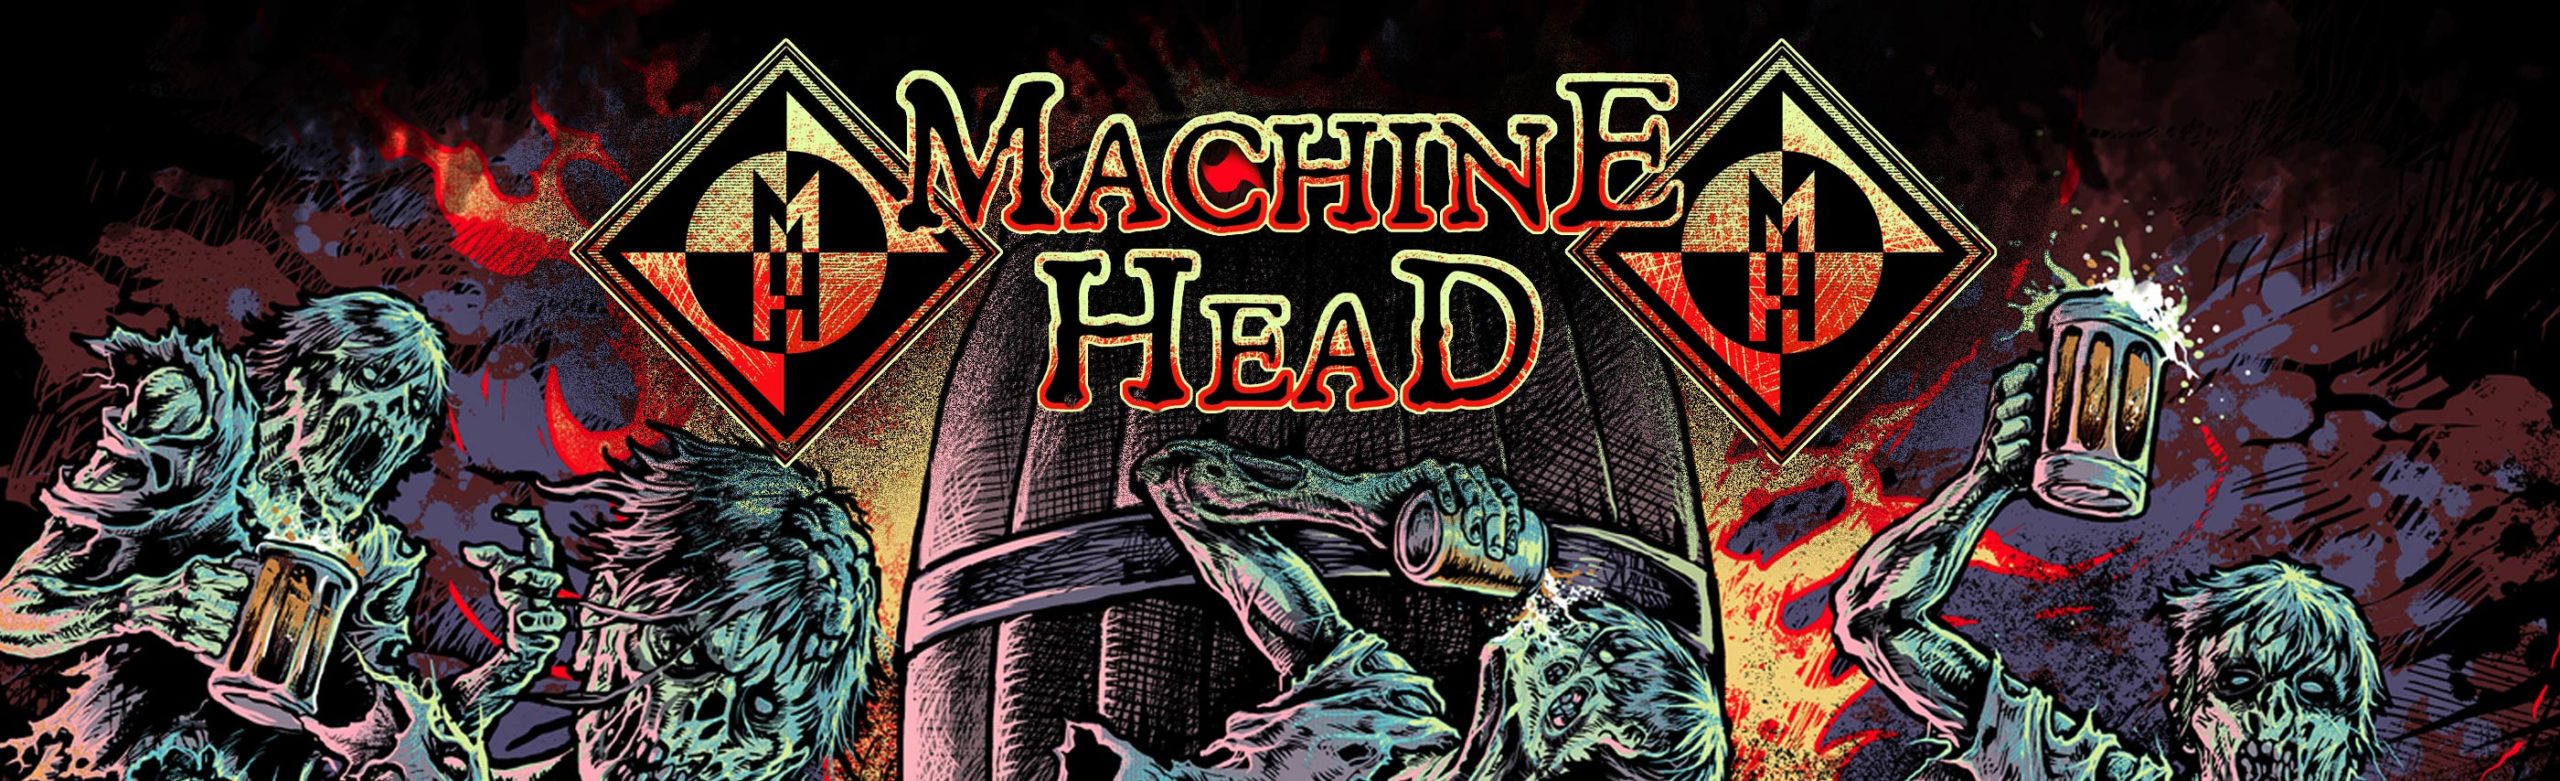 Event Info: Machine Head at The Top Hat 2022 Image